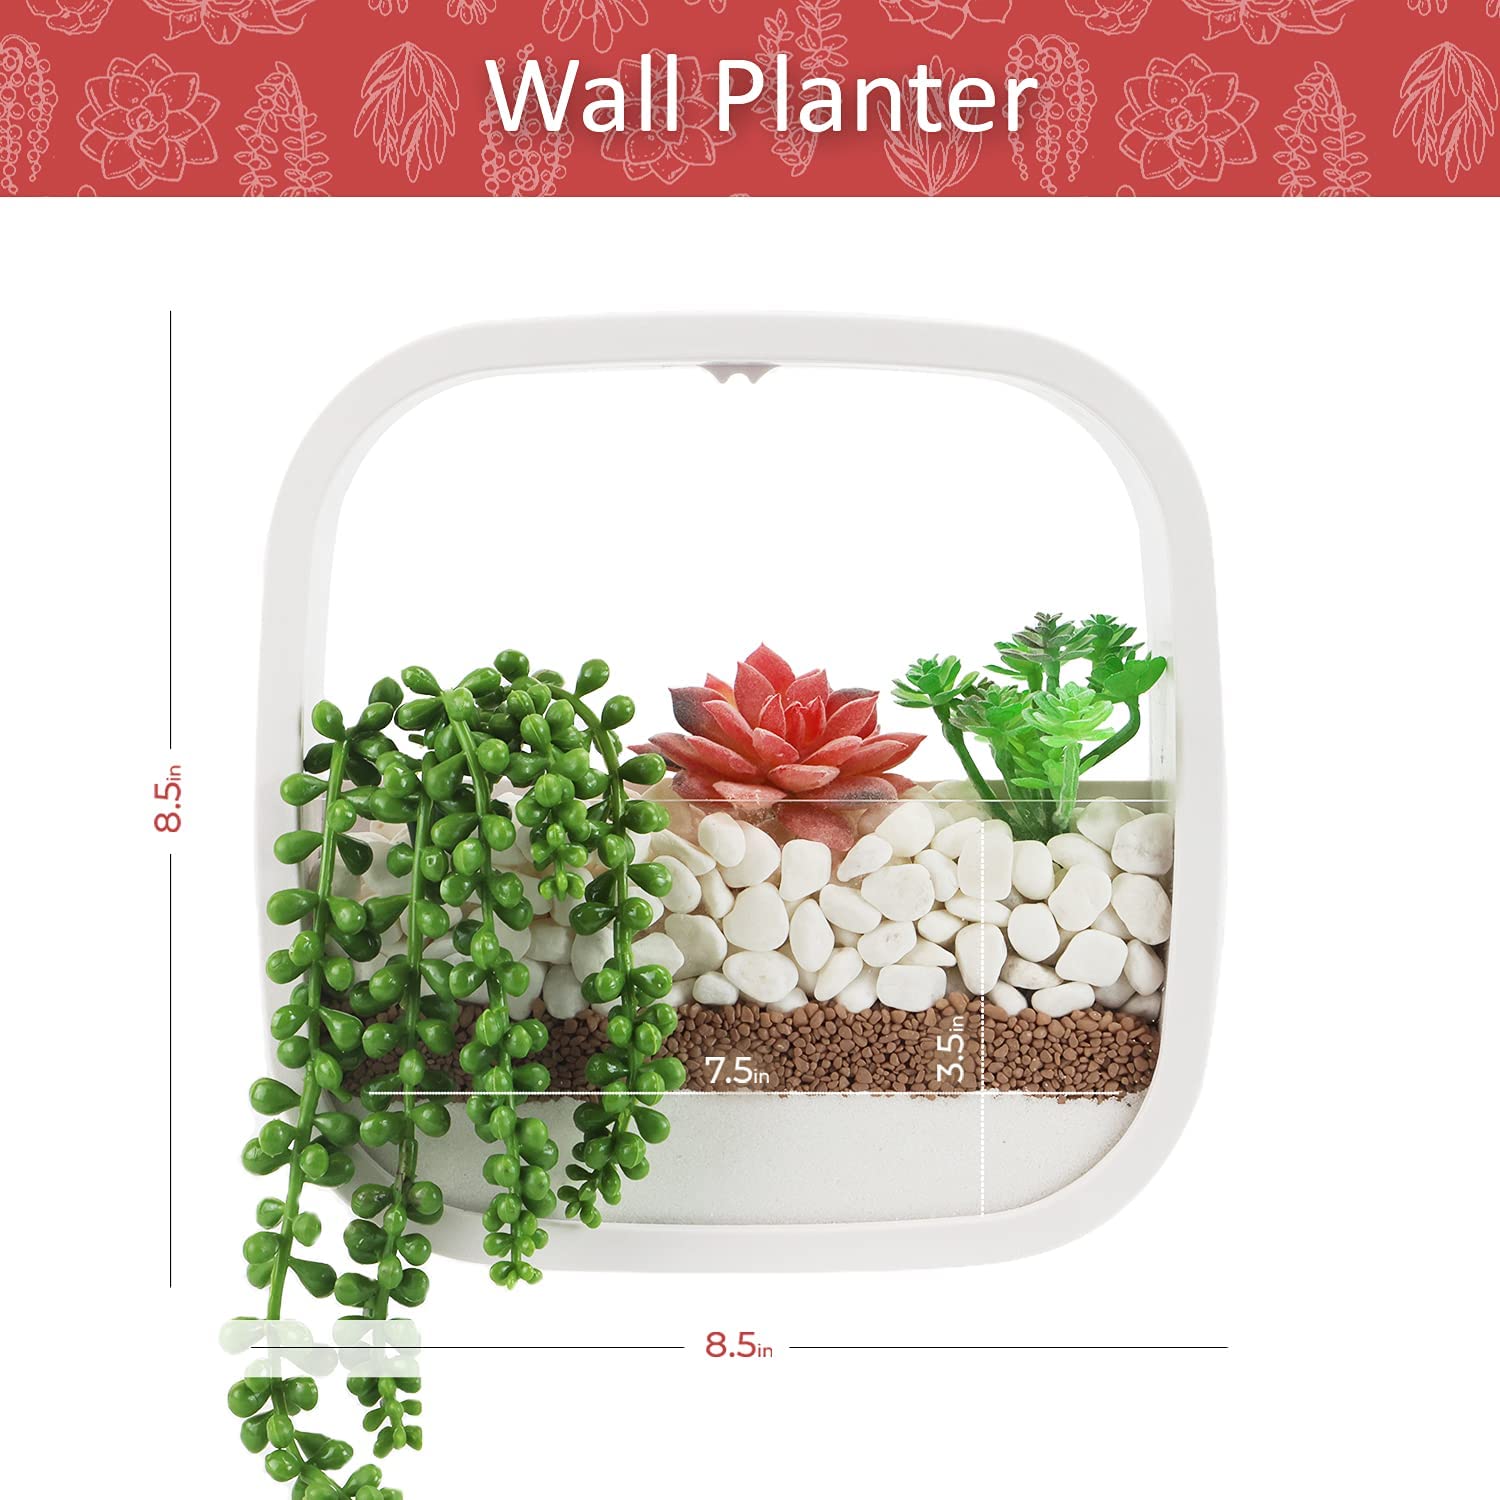 Hanging Decorative Plant Holder - Indoor and Outdoor Wall Planter - White